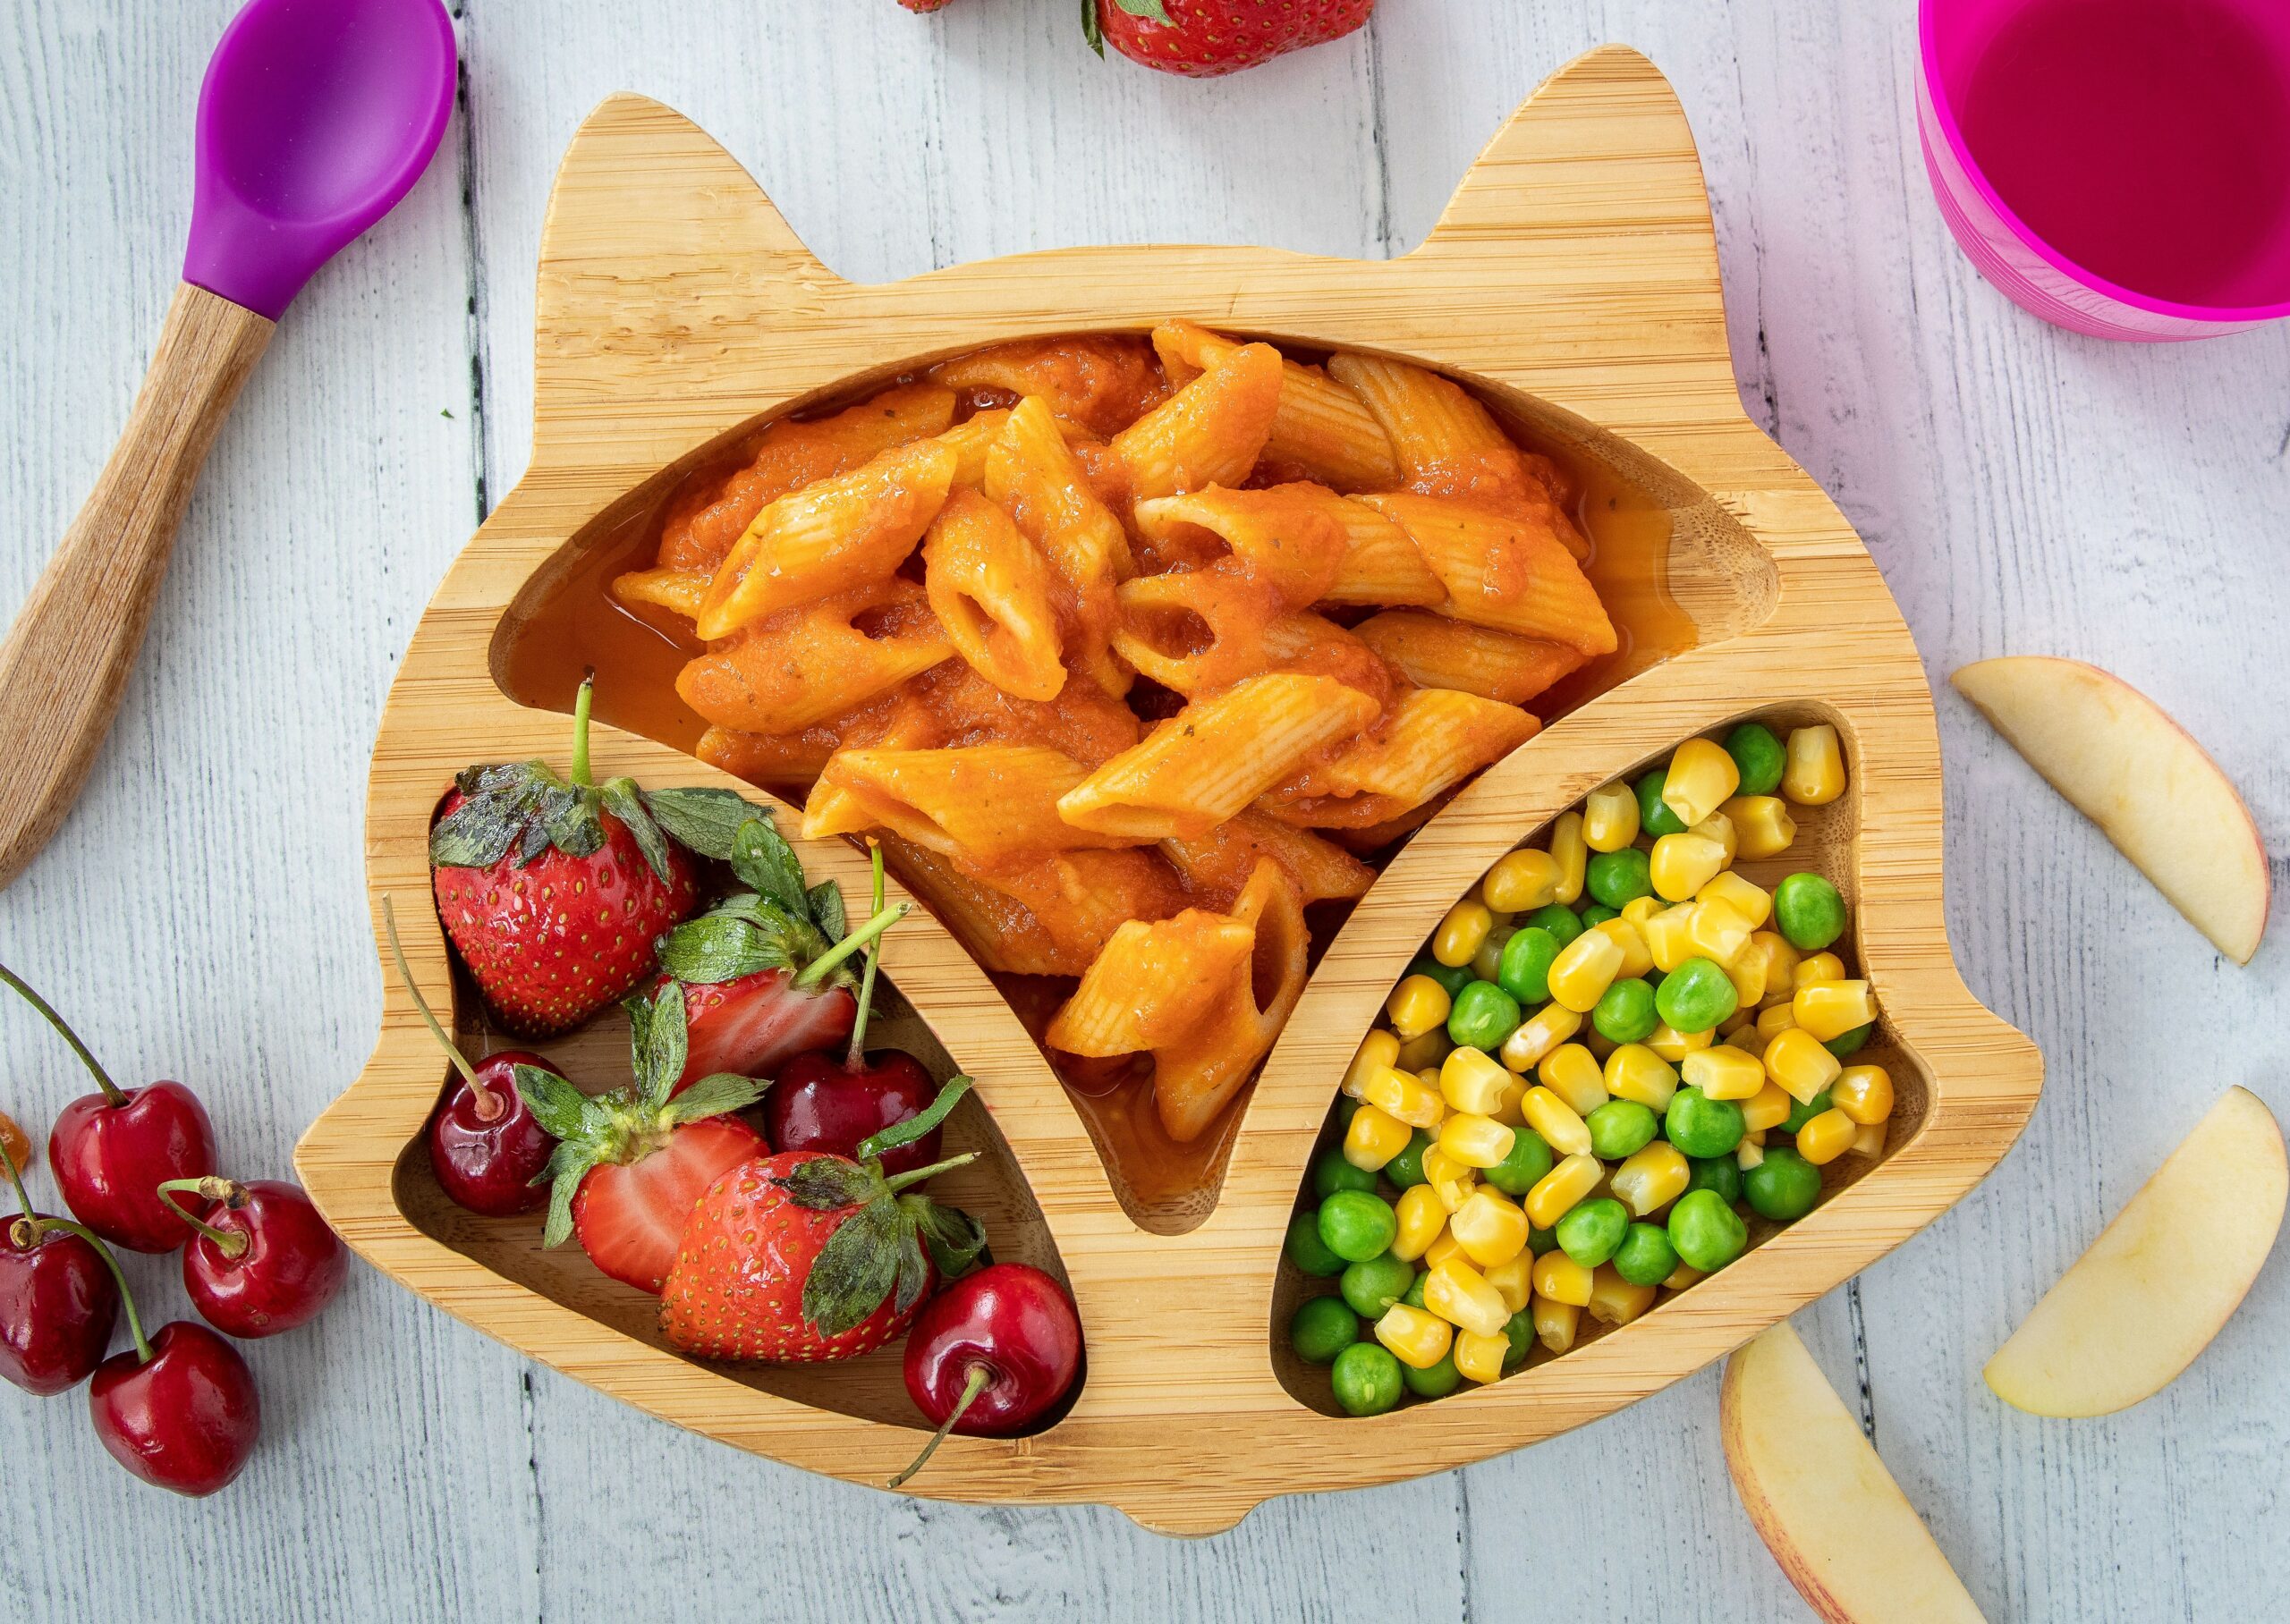 Meals for fussy toddlers | How to master toddler mealtime